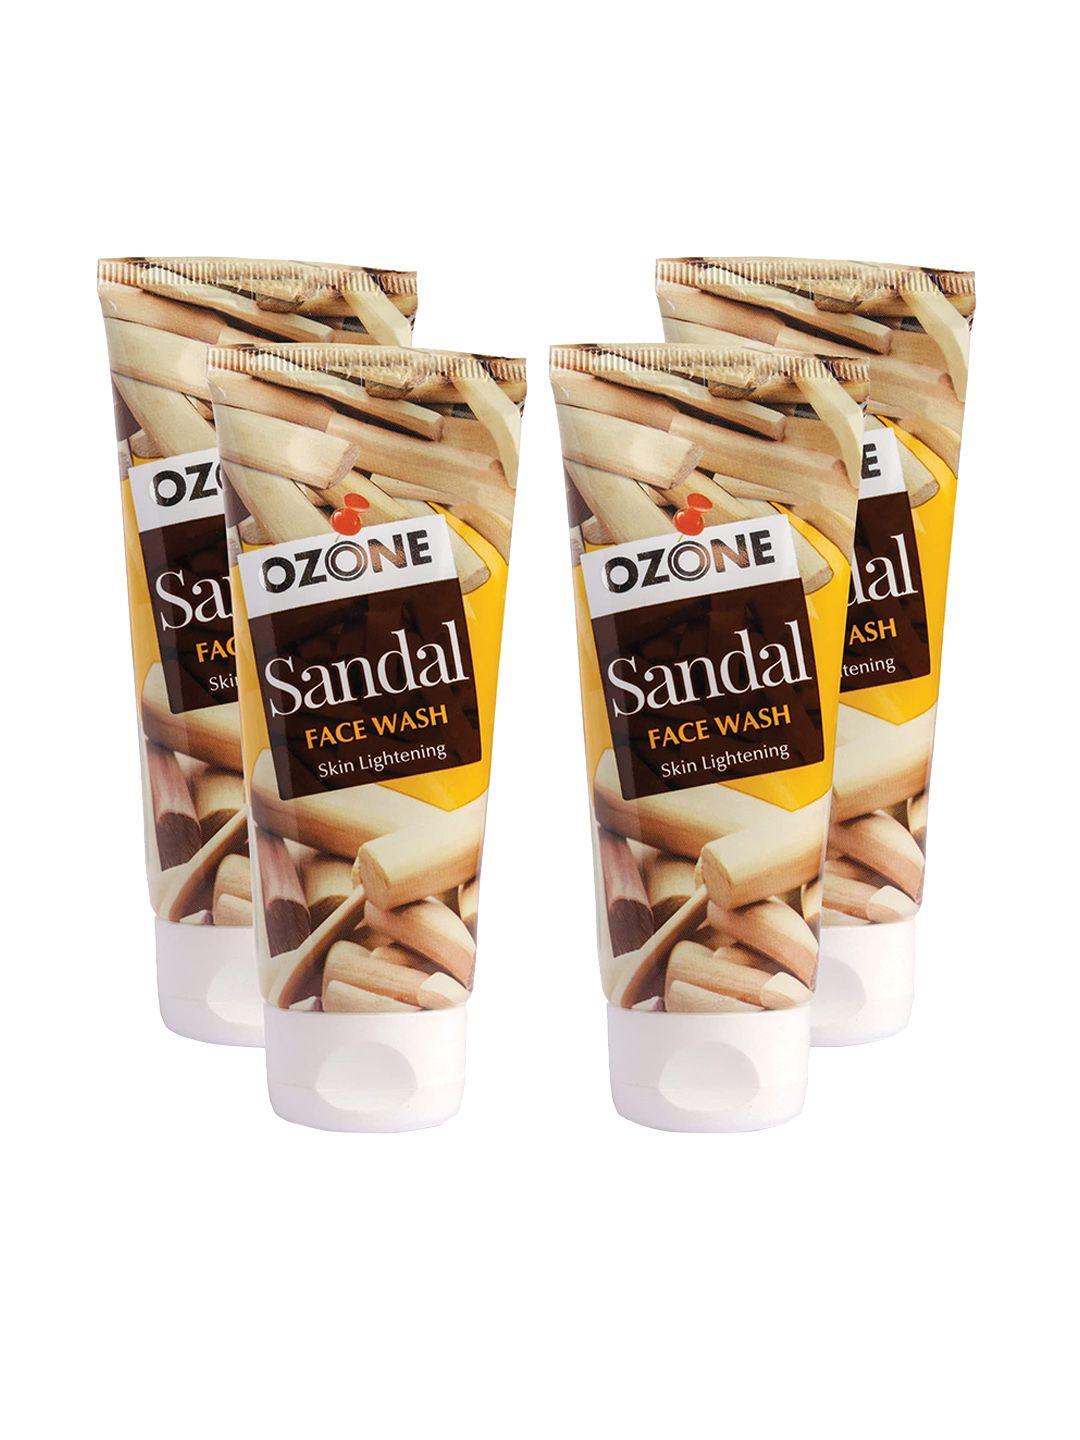 ozone set of 4 sandal face wash with aloe vera & cucumber for skin lightening - 60ml each